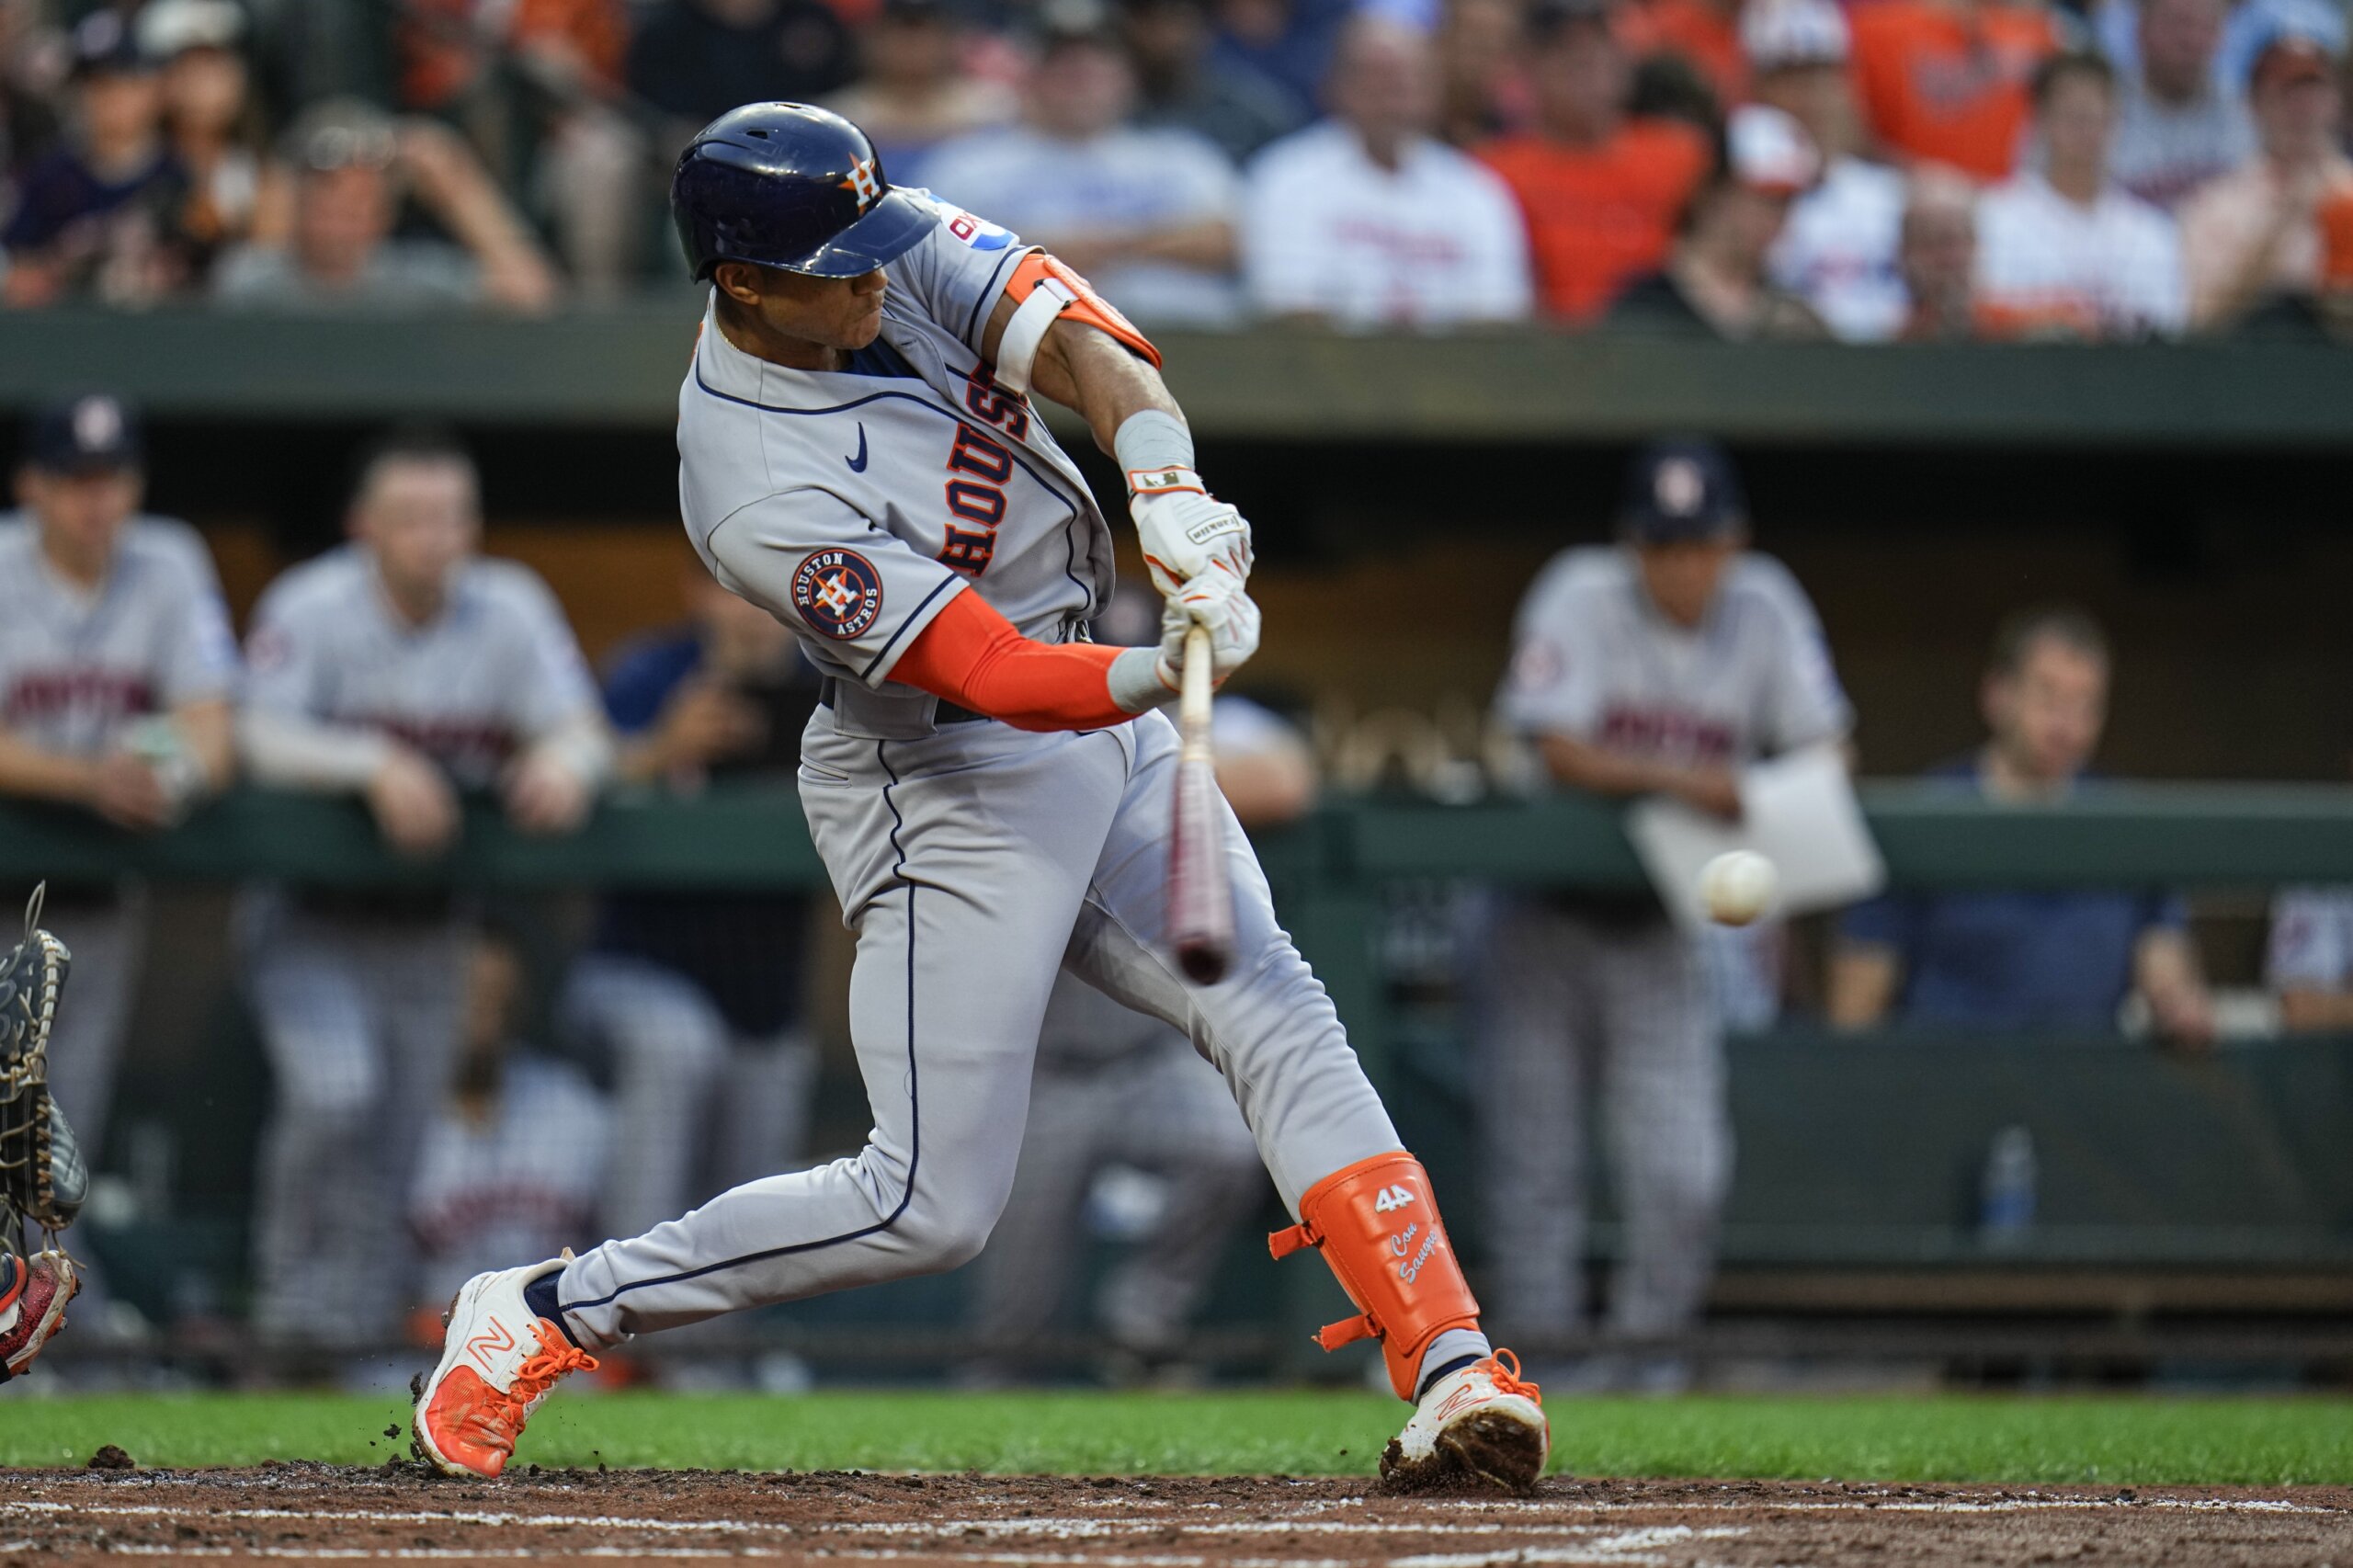 Astros vs. Orioles: Houston collapses in 9th inning when Ryan